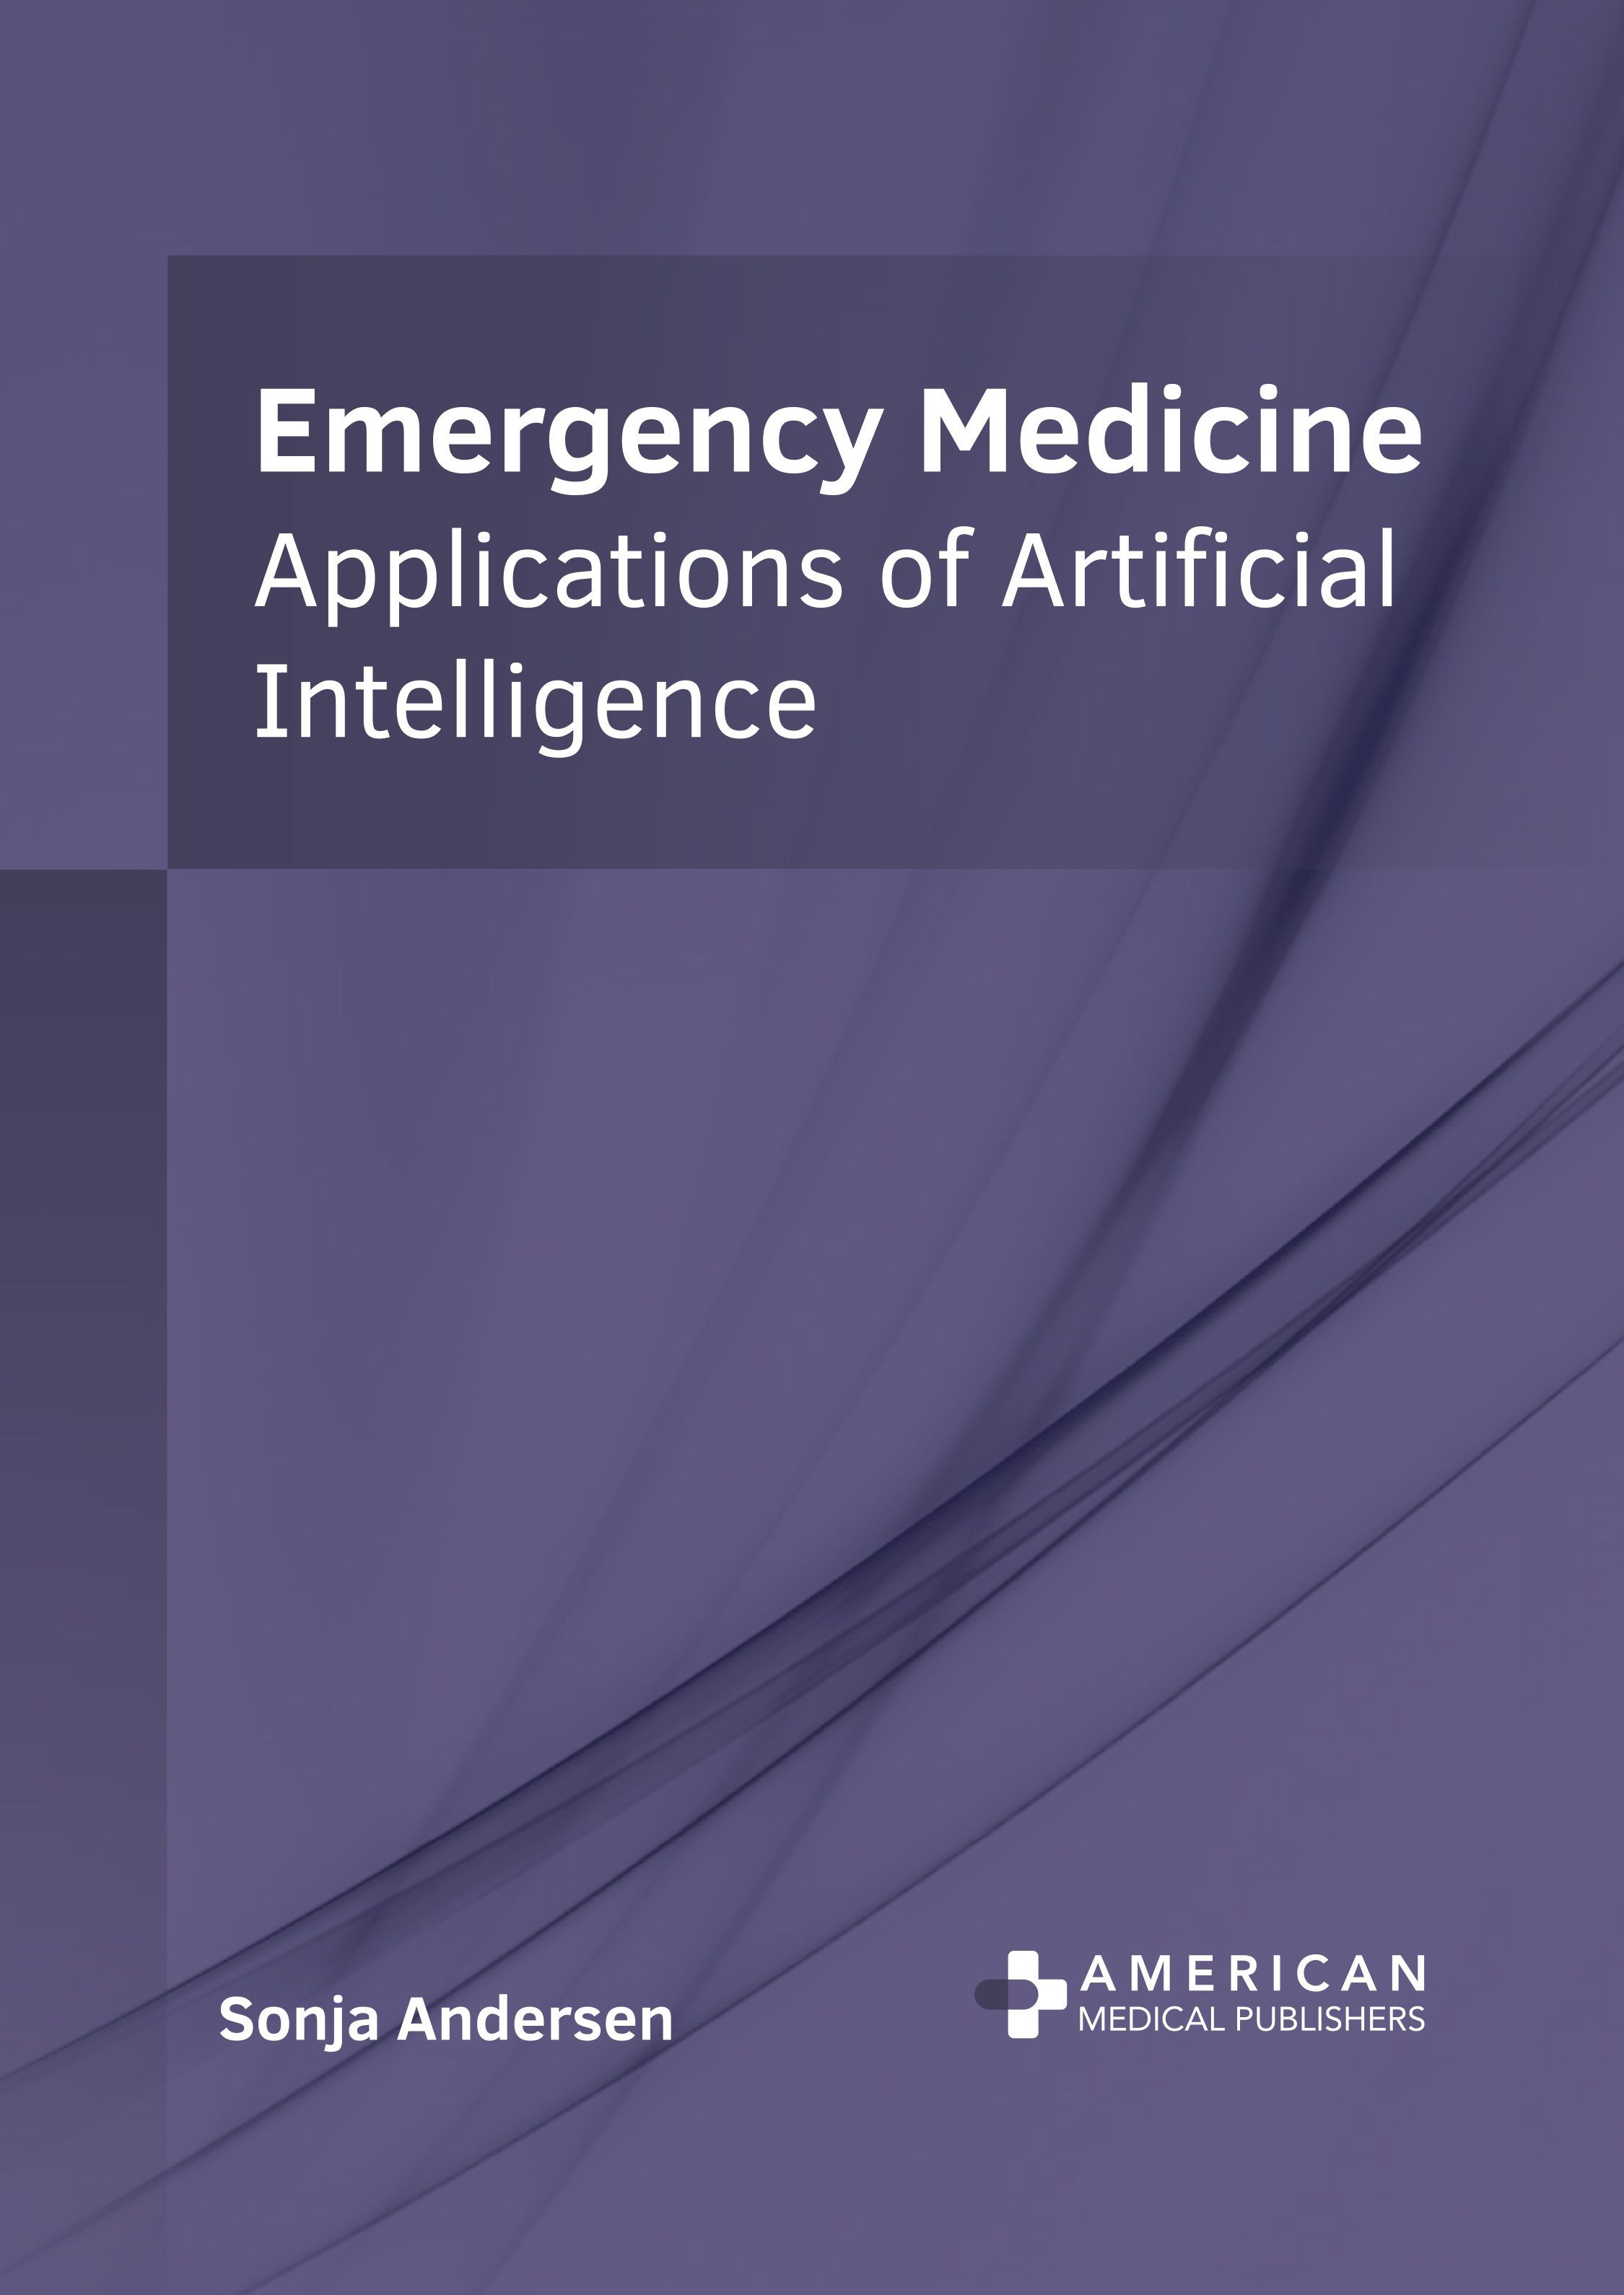 EMERGENCY MEDICINE: APPLICATIONS OF ARTIFICIAL INTELLIGENCE